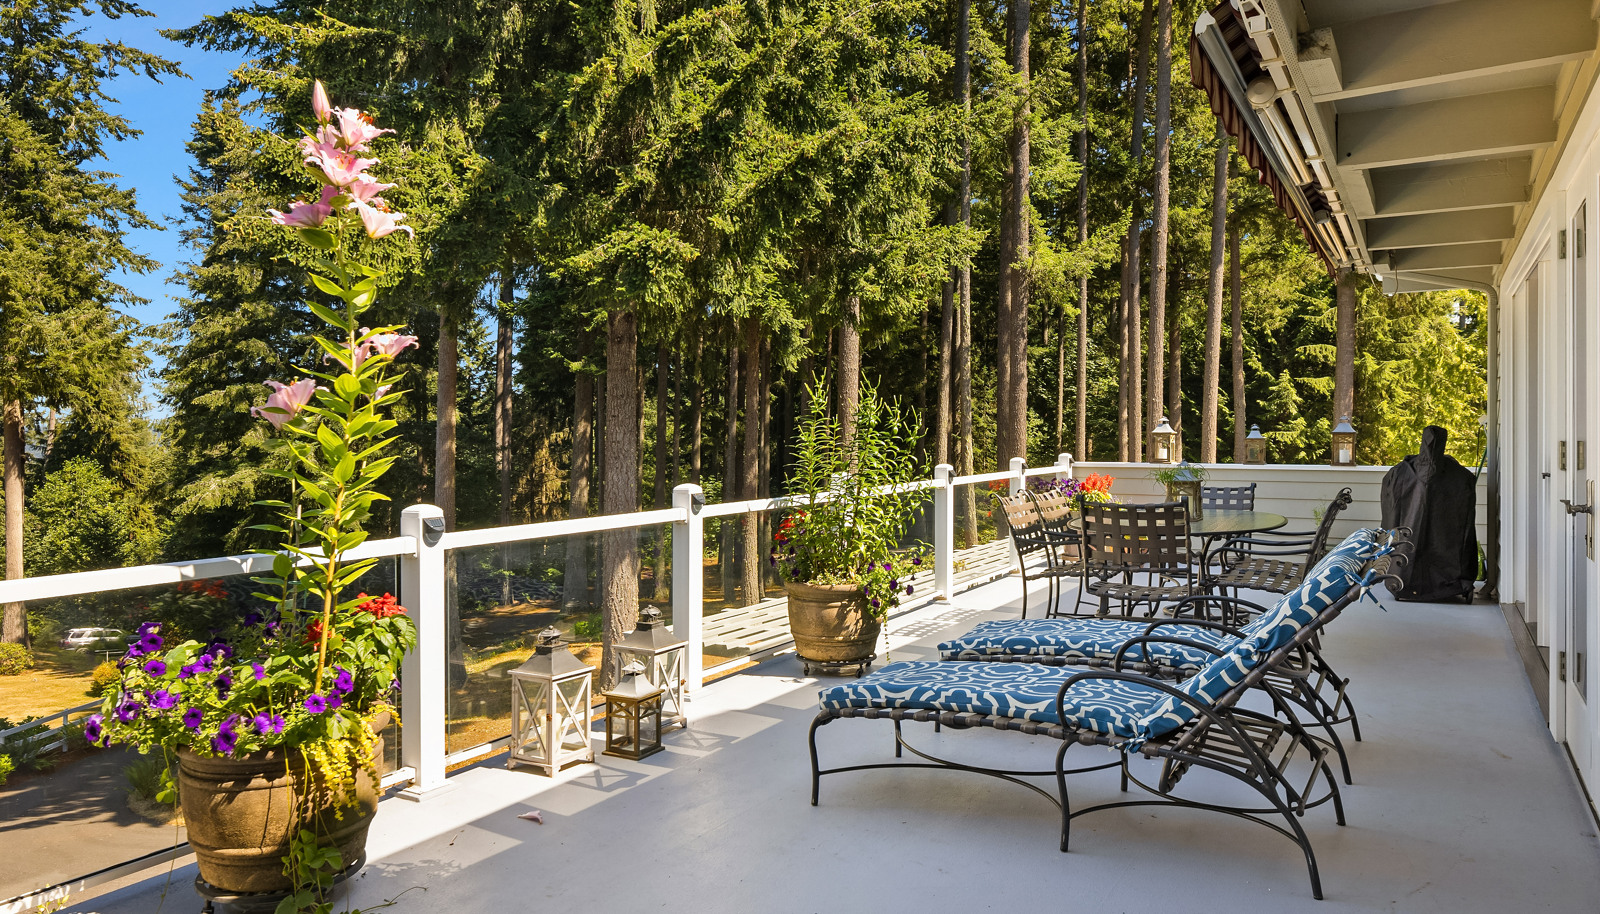 Enormous deck with retractable awning, glass panel railings, and sublime views!